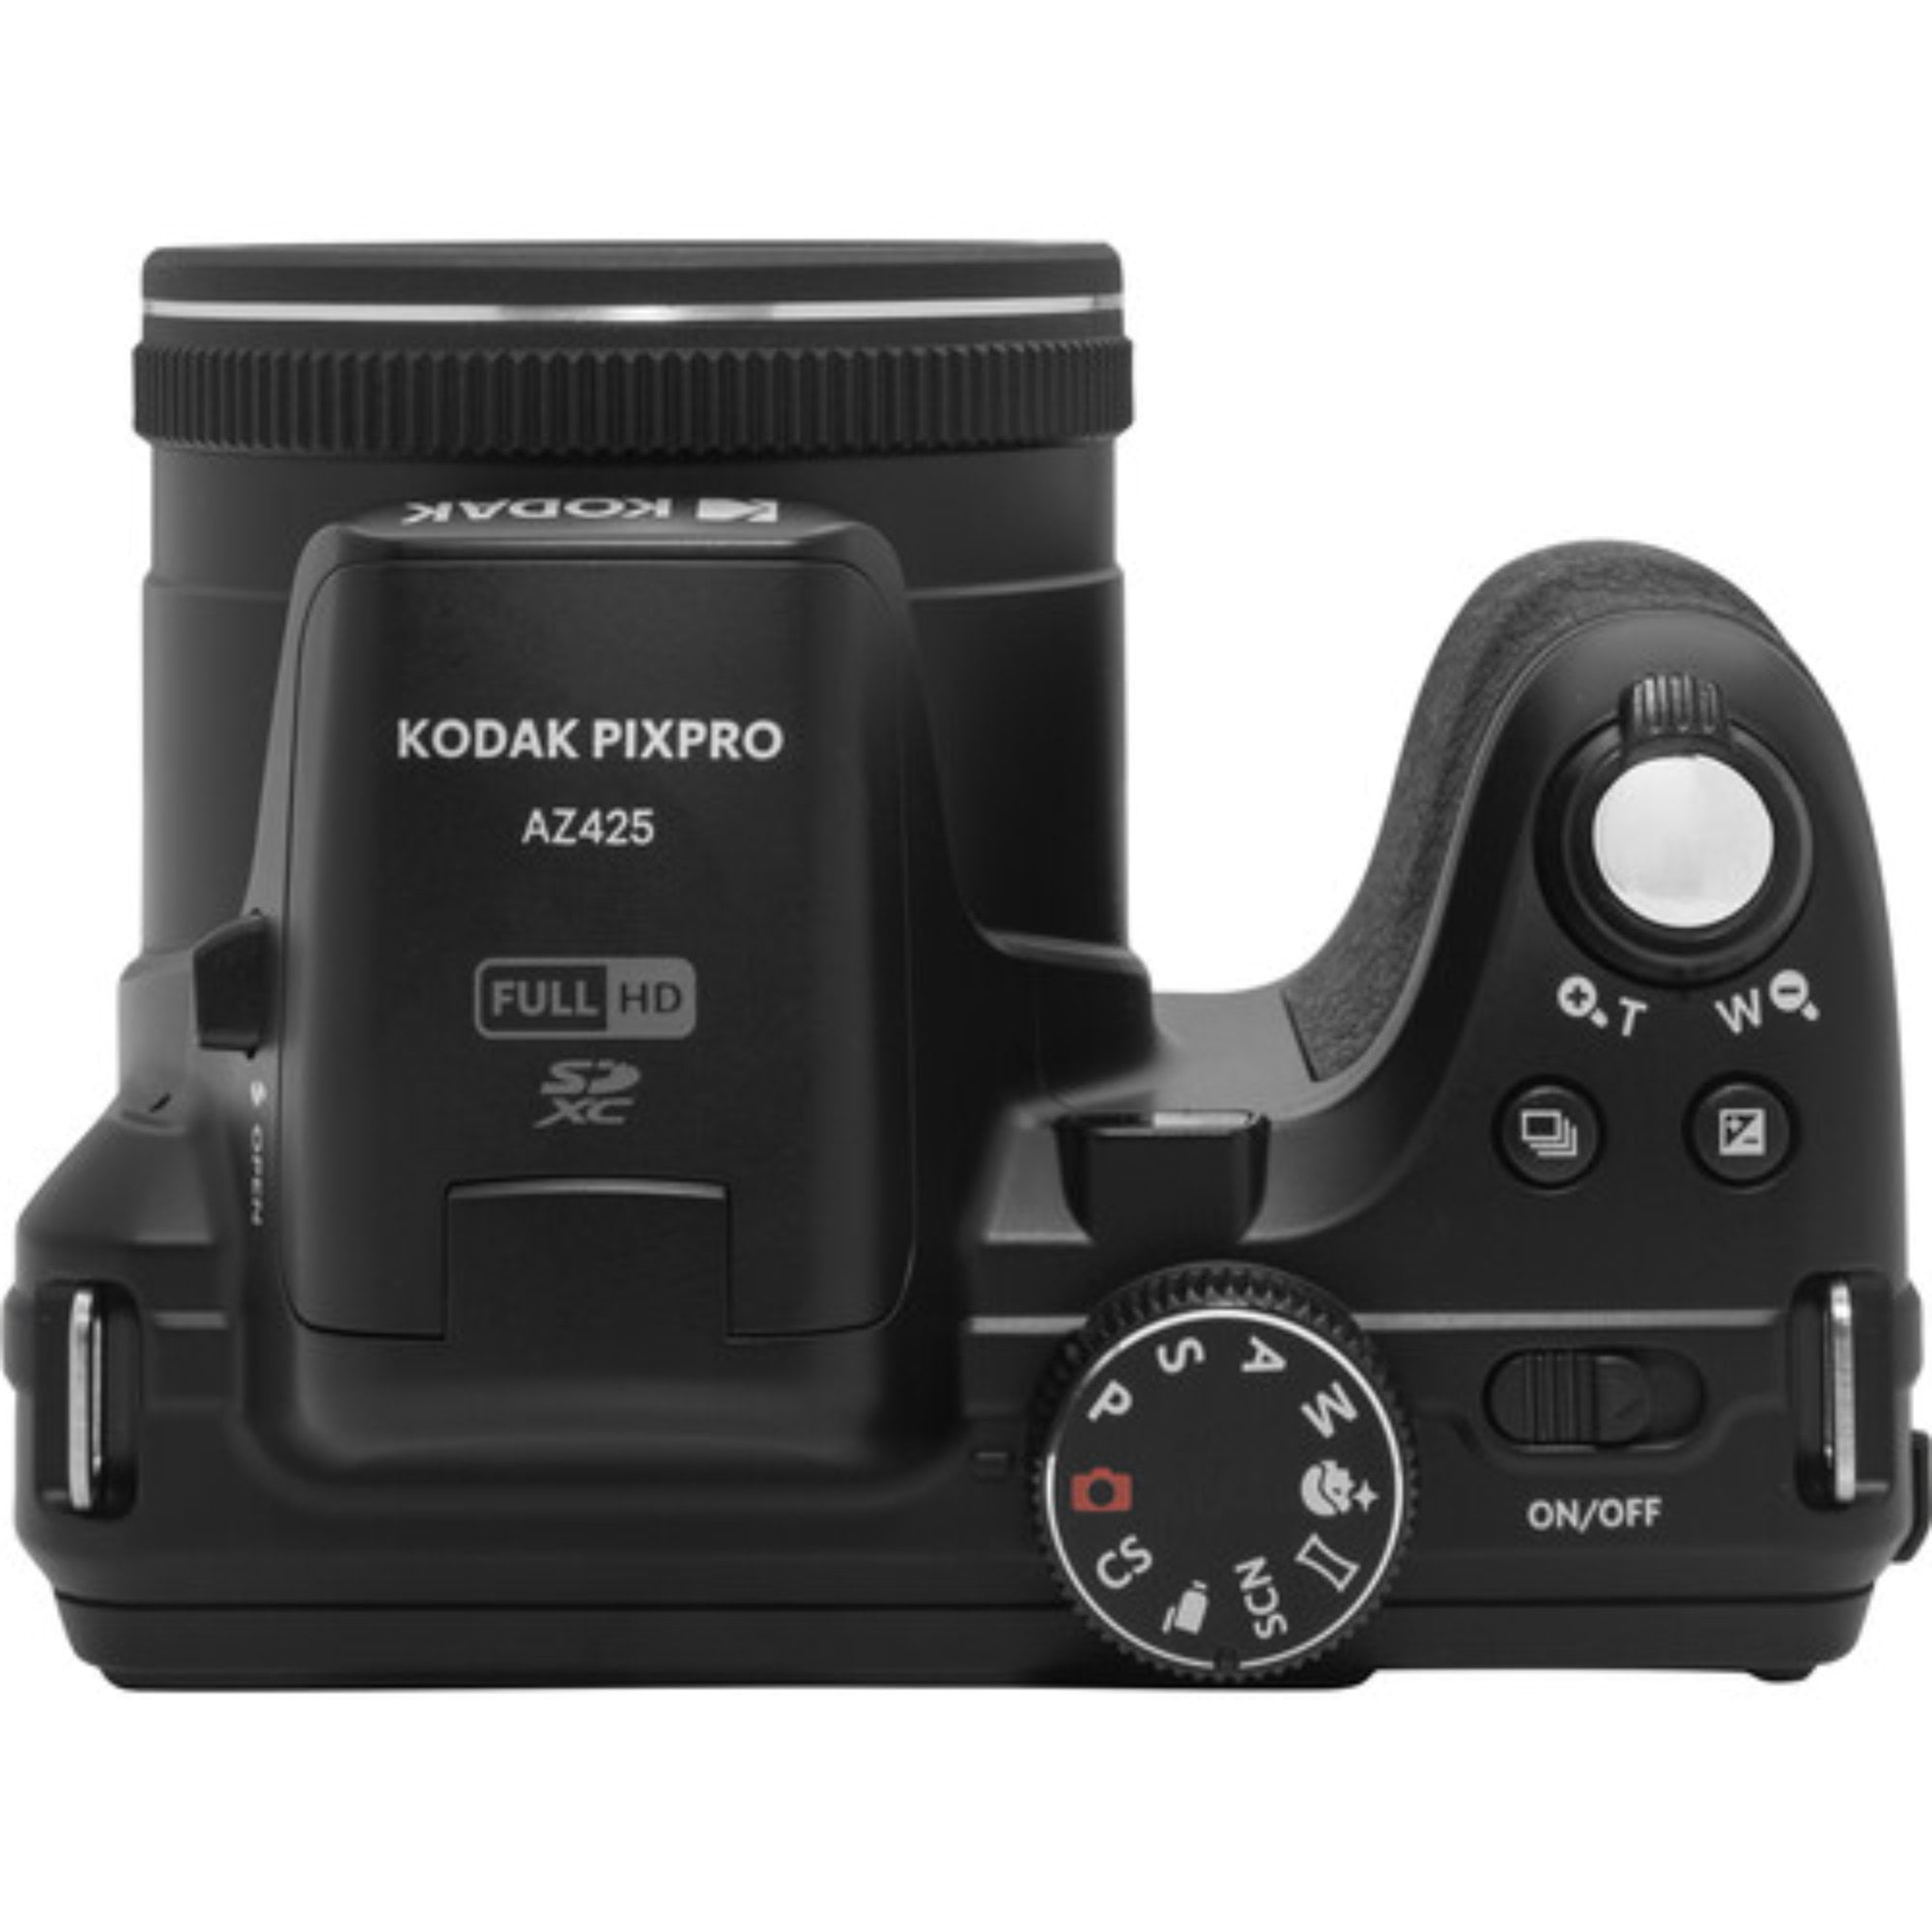 KODAK PIXPRO AZ425 Astro Zoom 20MP Digital Camera (Black) Bundle with 32GB  SD Card, Holster Case and Accessory Kit, Battery and Charger Kit, Cable